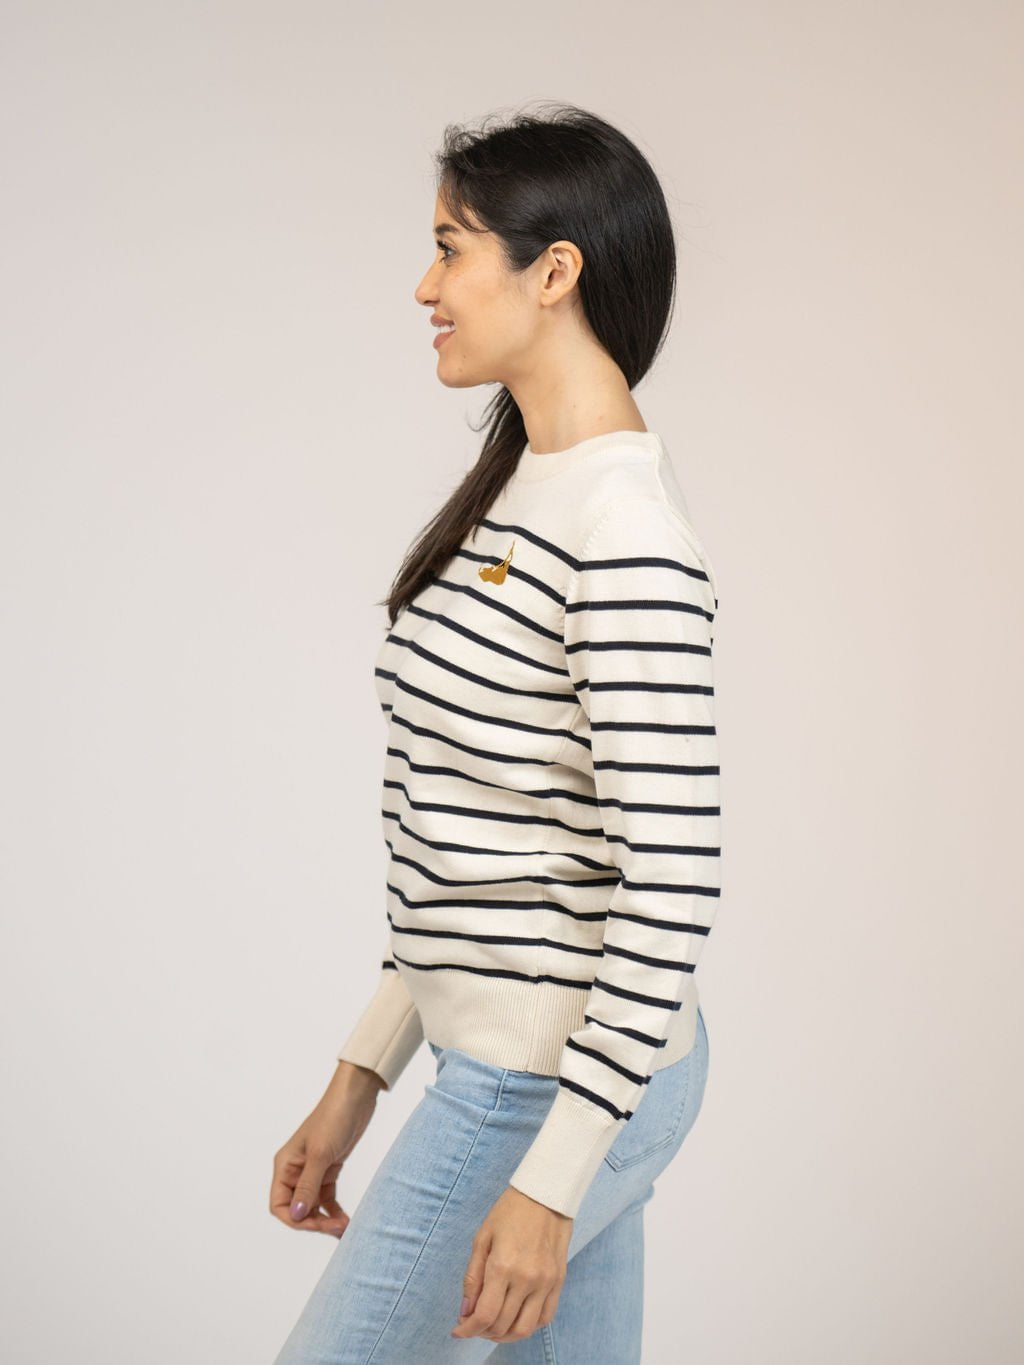 Beau & Ro Sweater Ivory Striped Sweater with Nantucket Island Embroidery